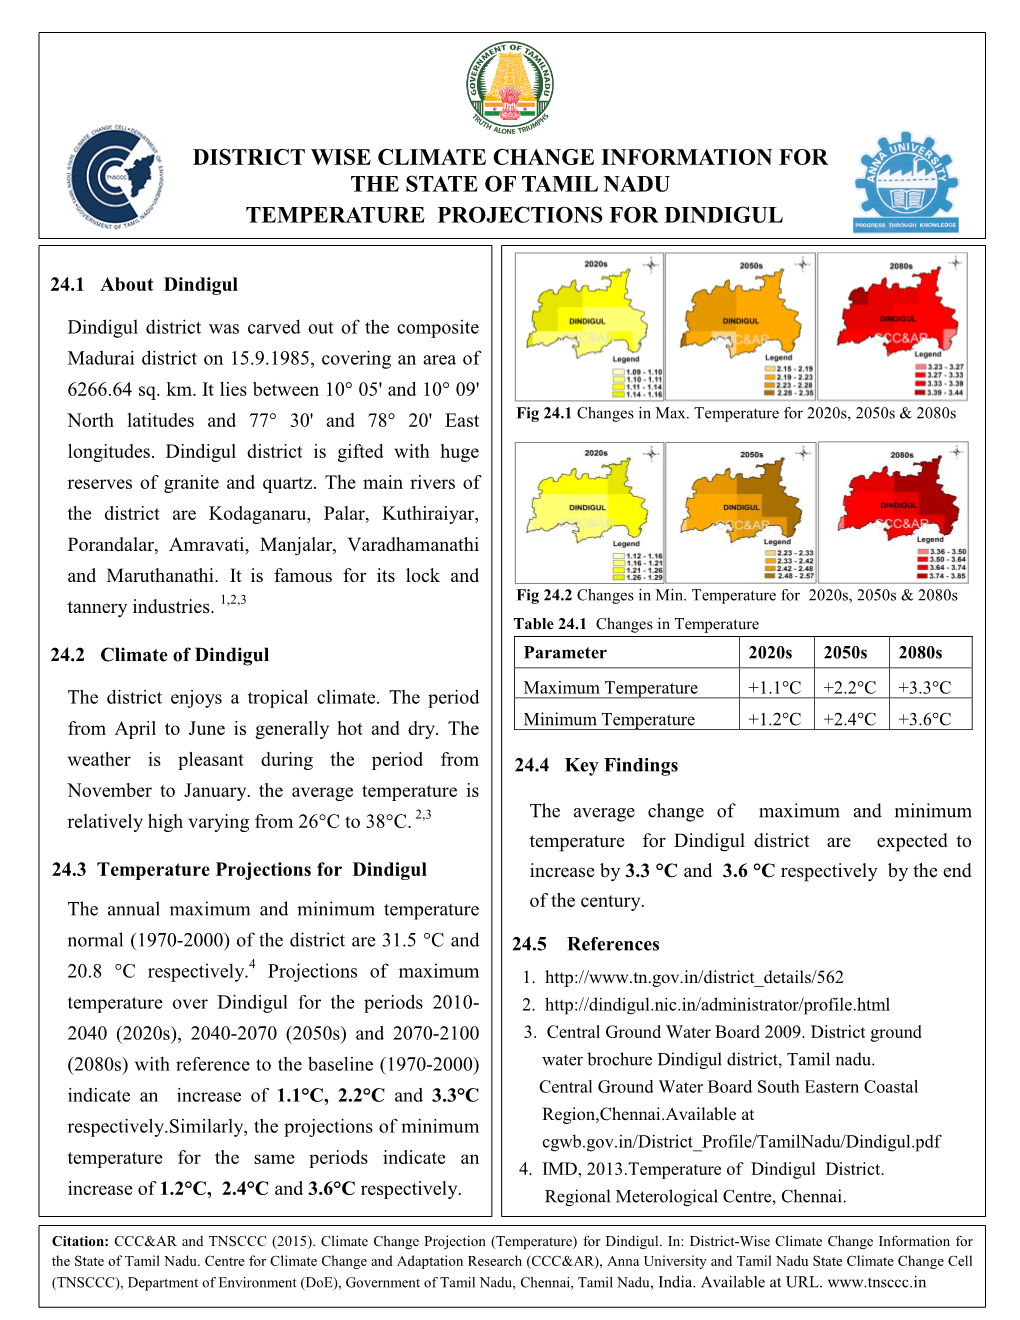 District Wise Climate Change Information for the State of Tamil Nadu Temperature Projections for Dindigul